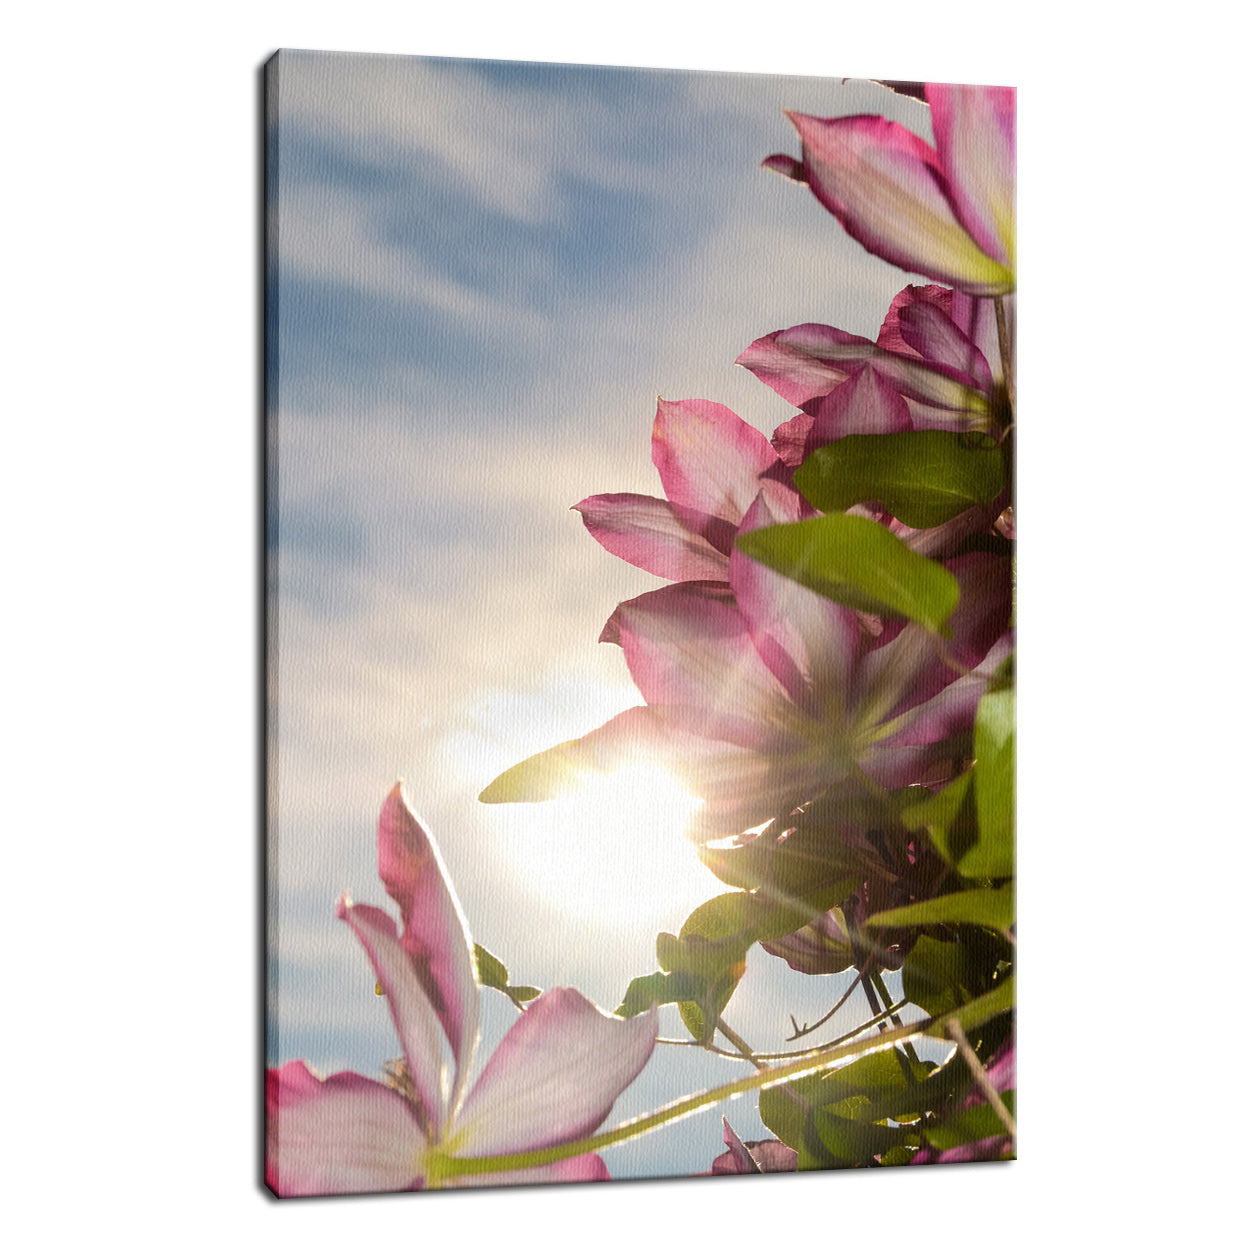 Towering Clematis Nature / Floral Photo Fine Art Canvas Wall Art Prints  - PIPAFINEART